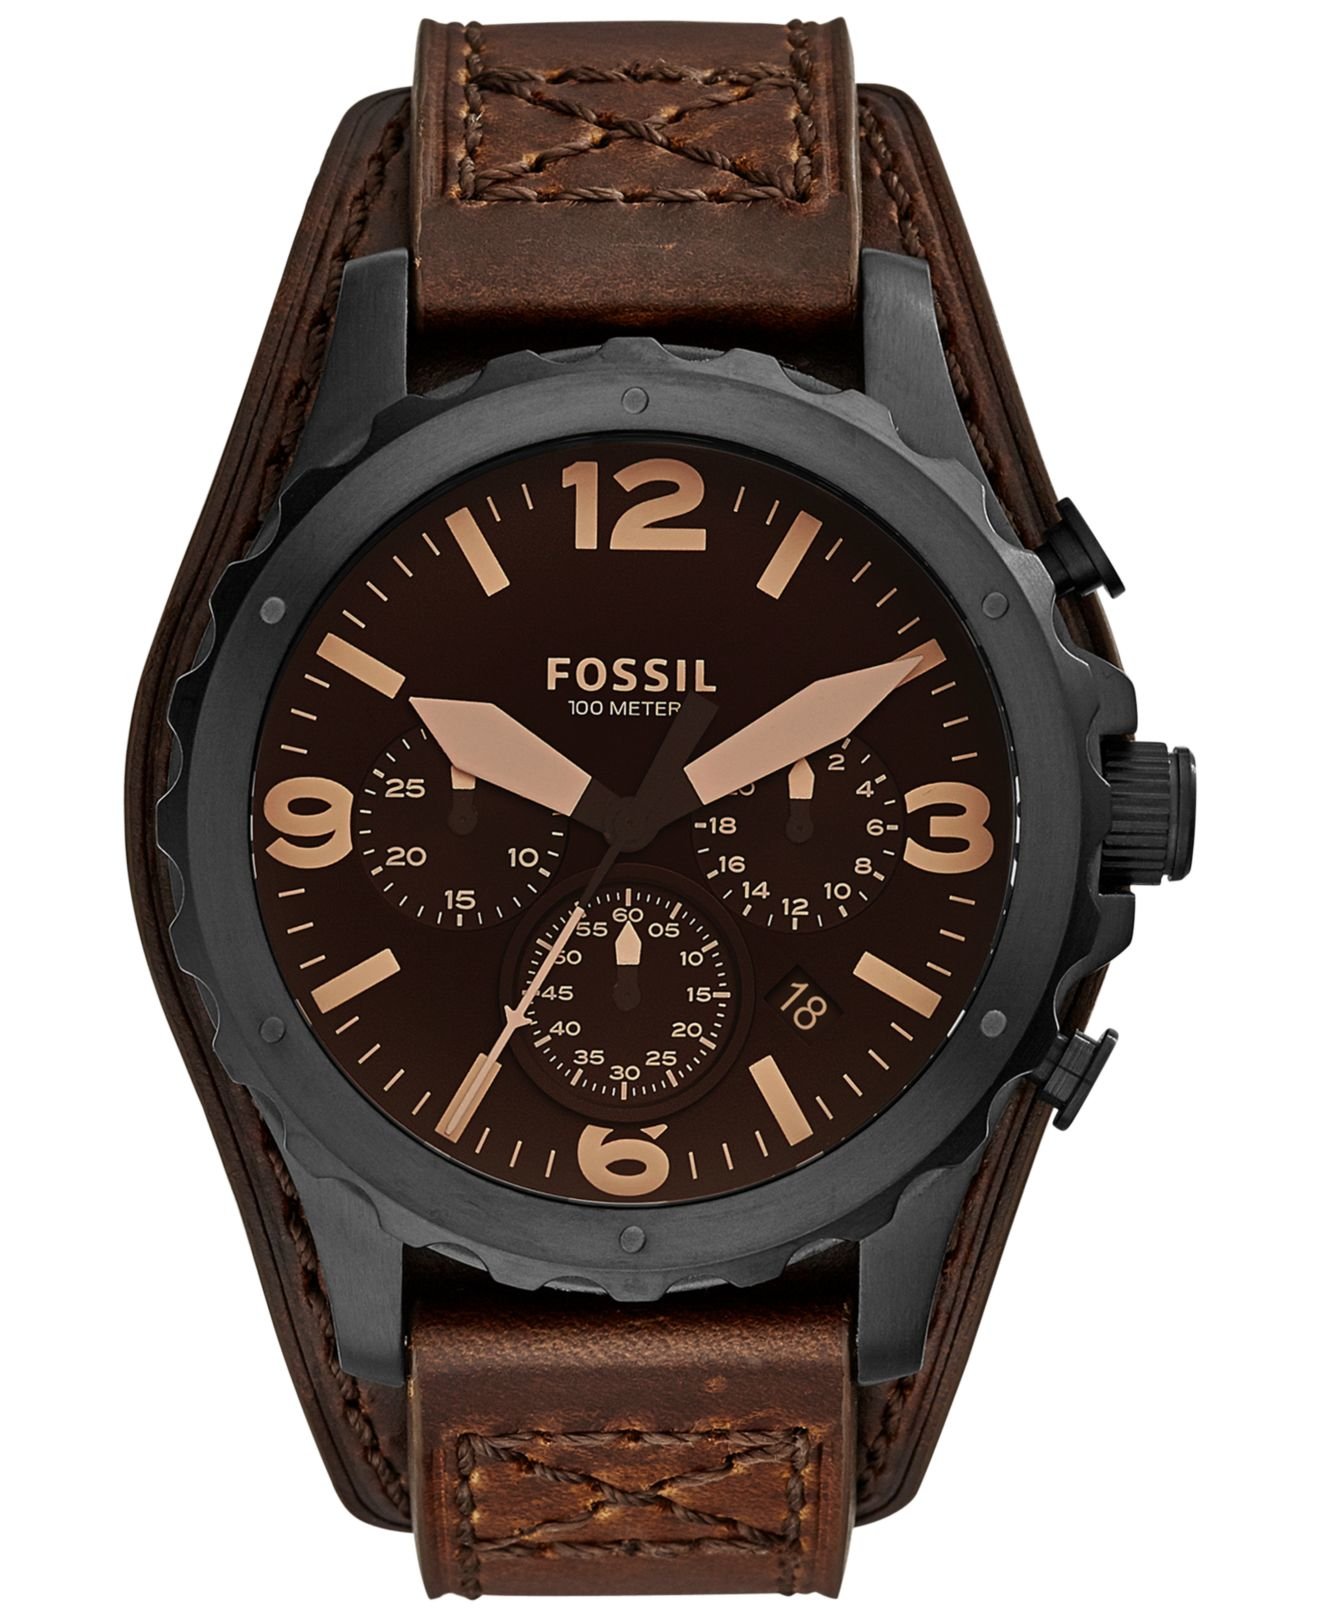 Lyst - Fossil Men's Chronograph Nate Dark Brown Leather Strap Watch